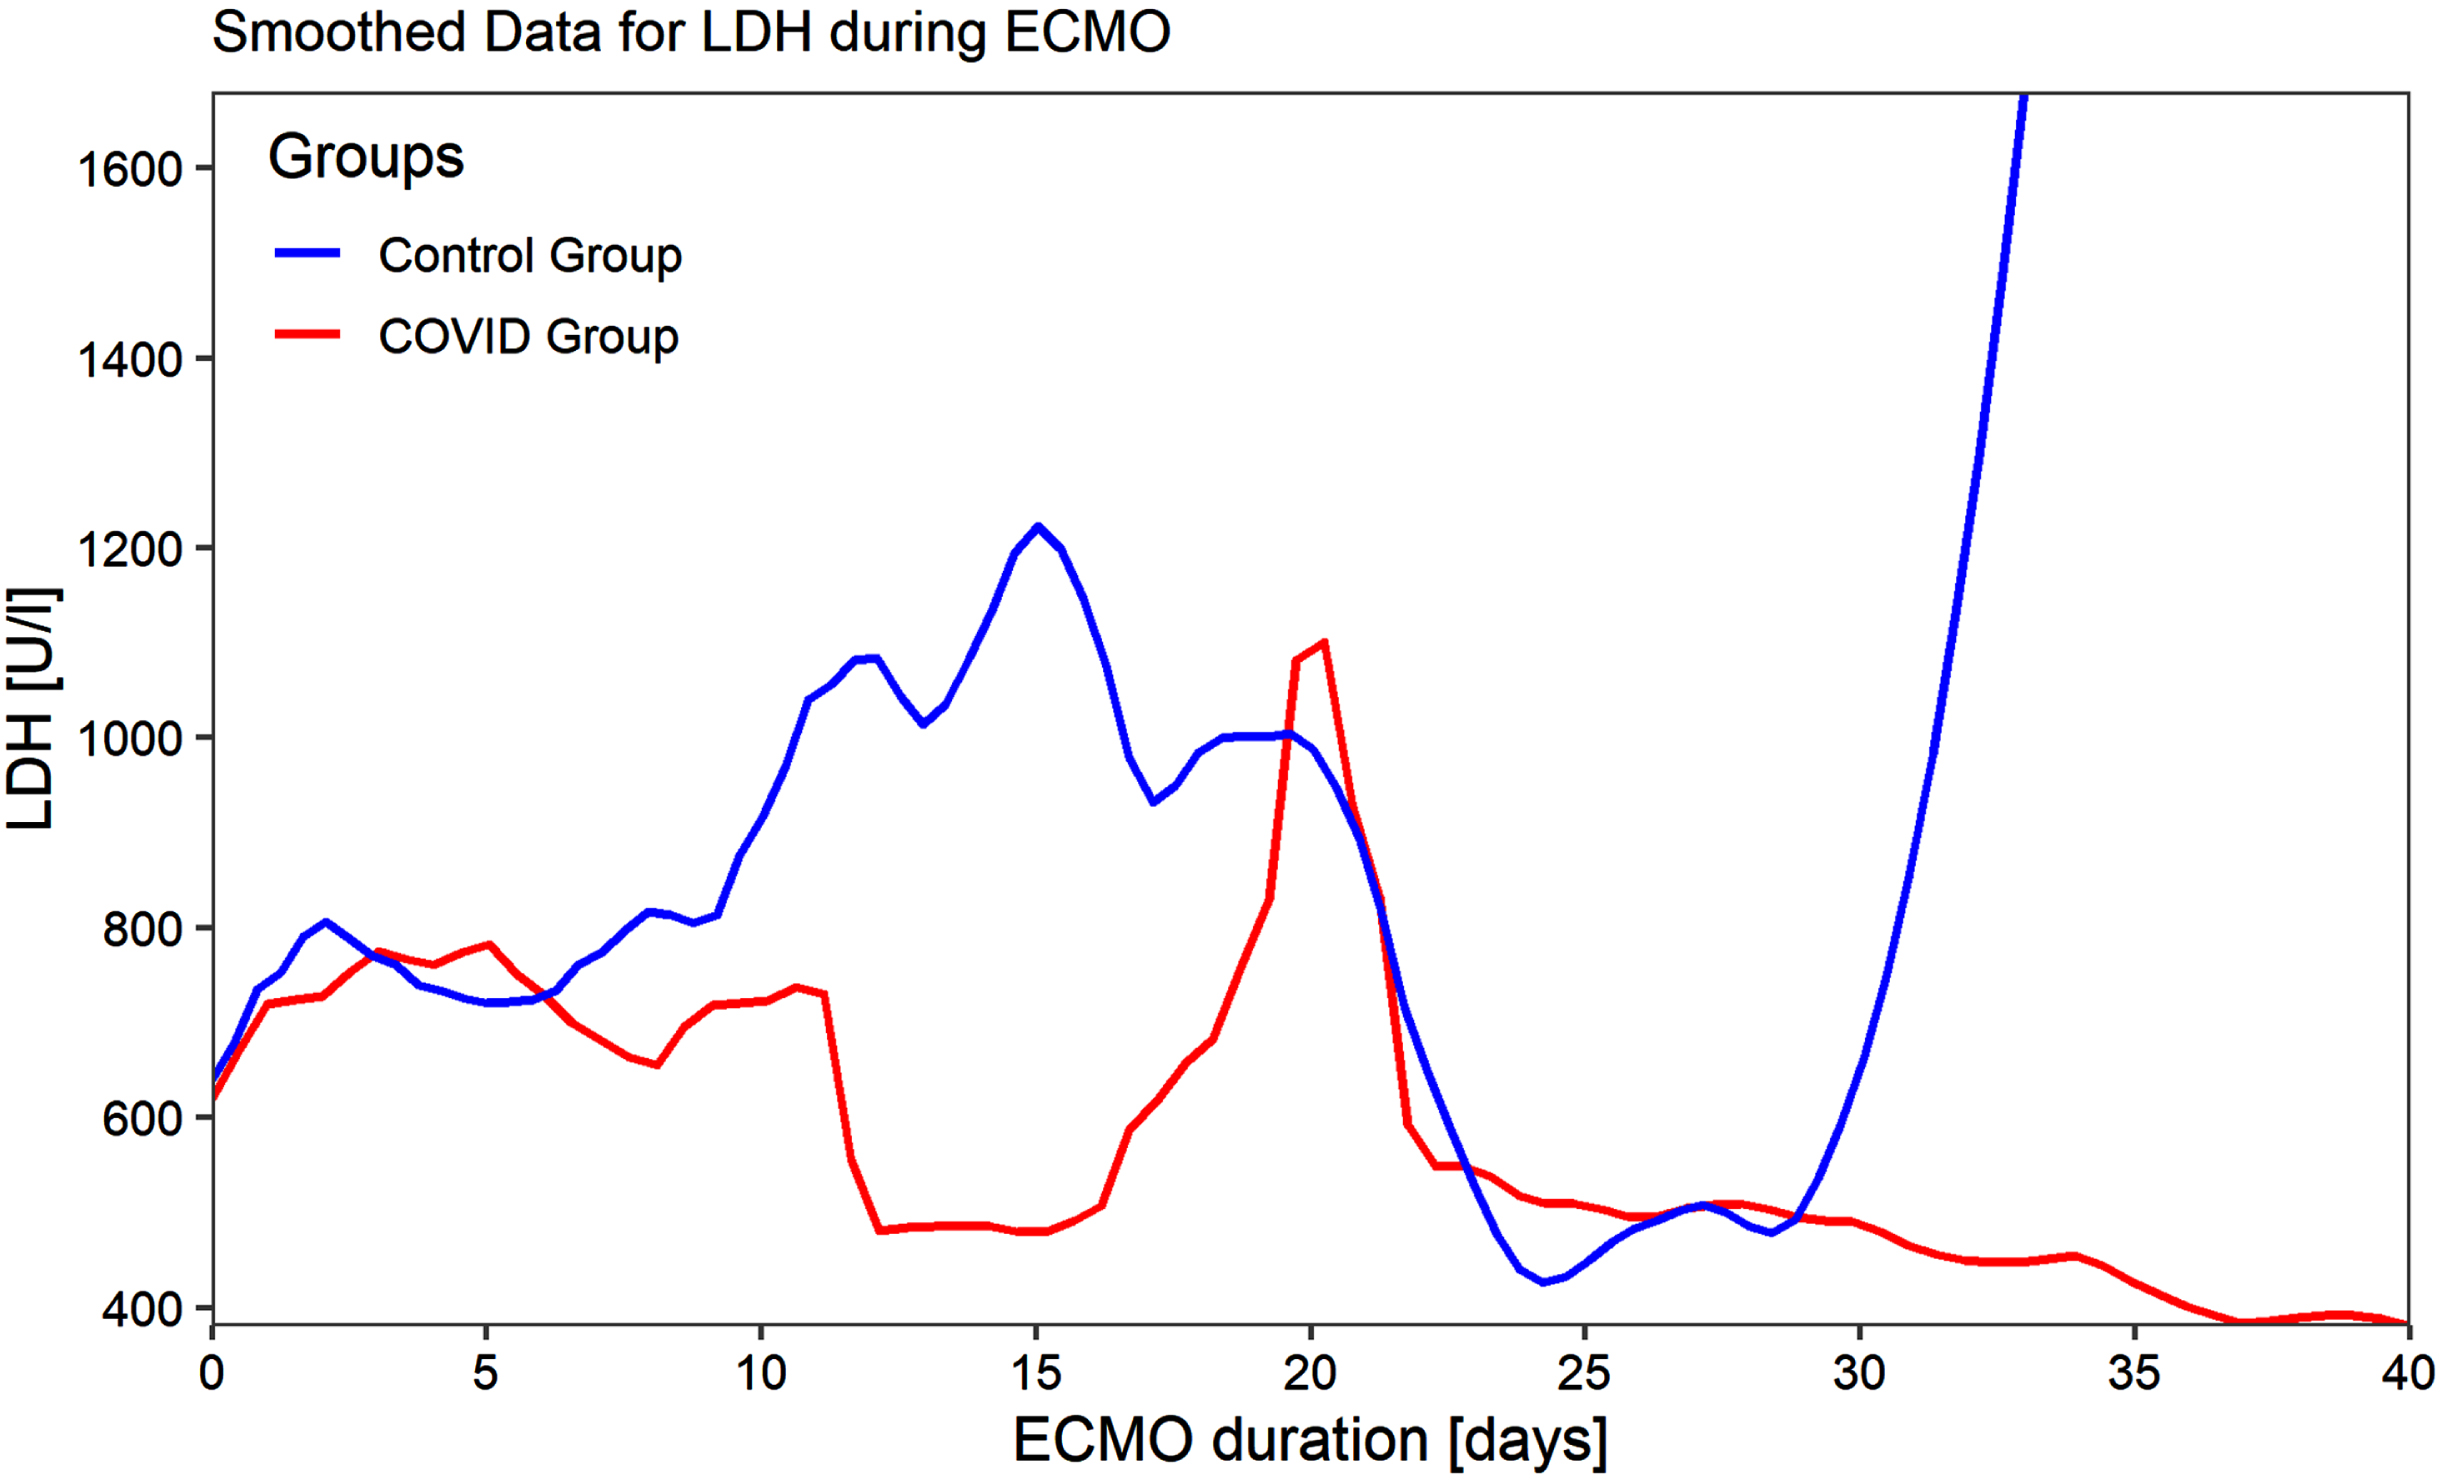 LDH levels during ECMO support.